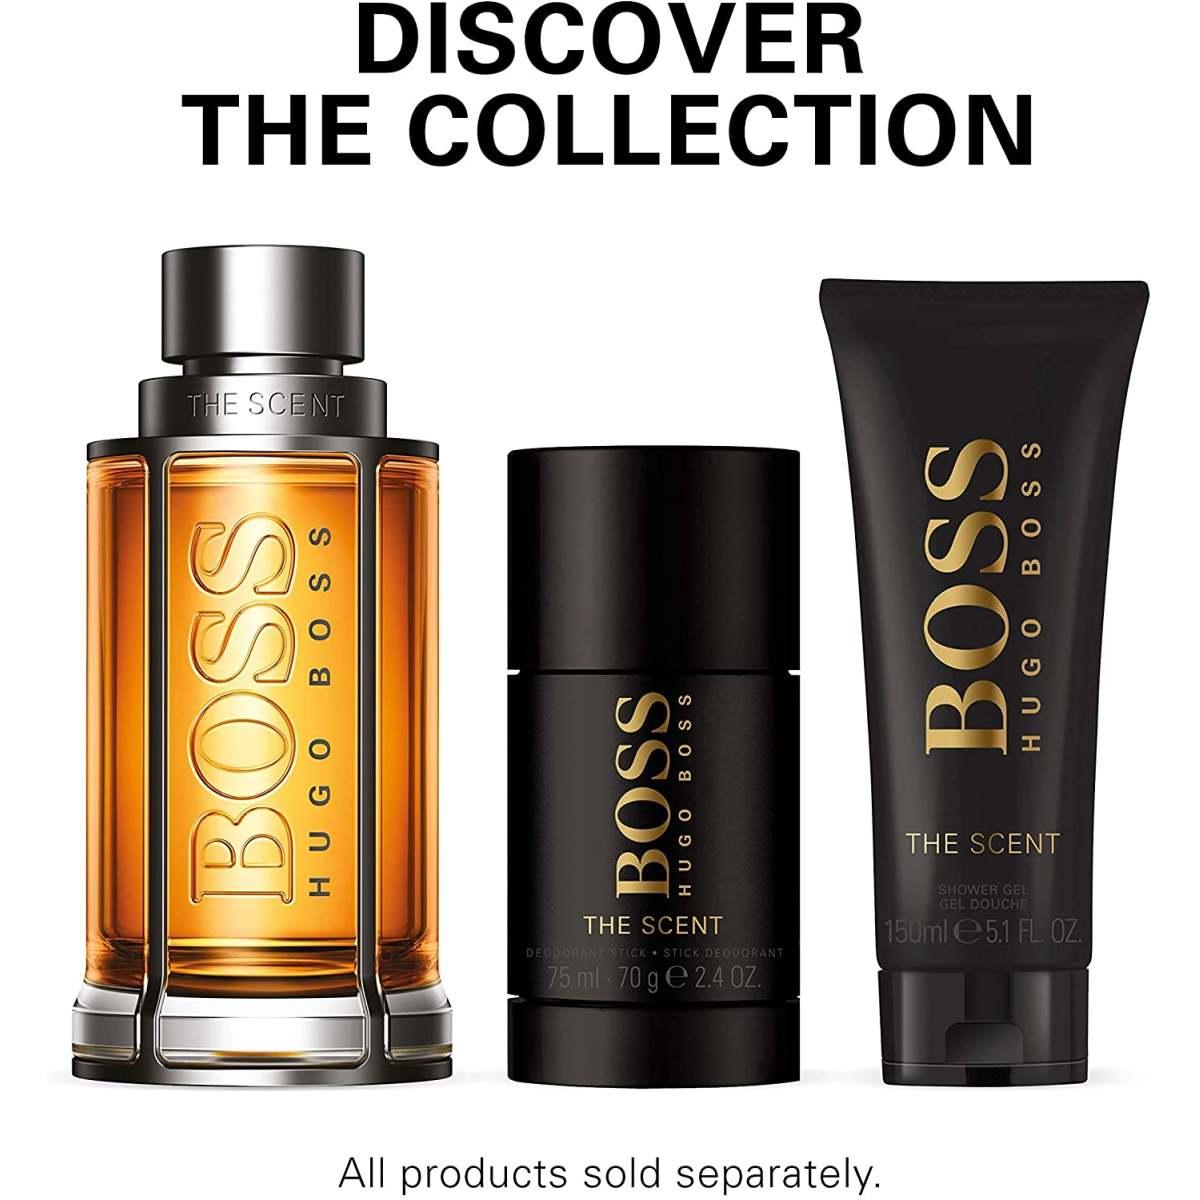 Boss the scent 100 ml asl